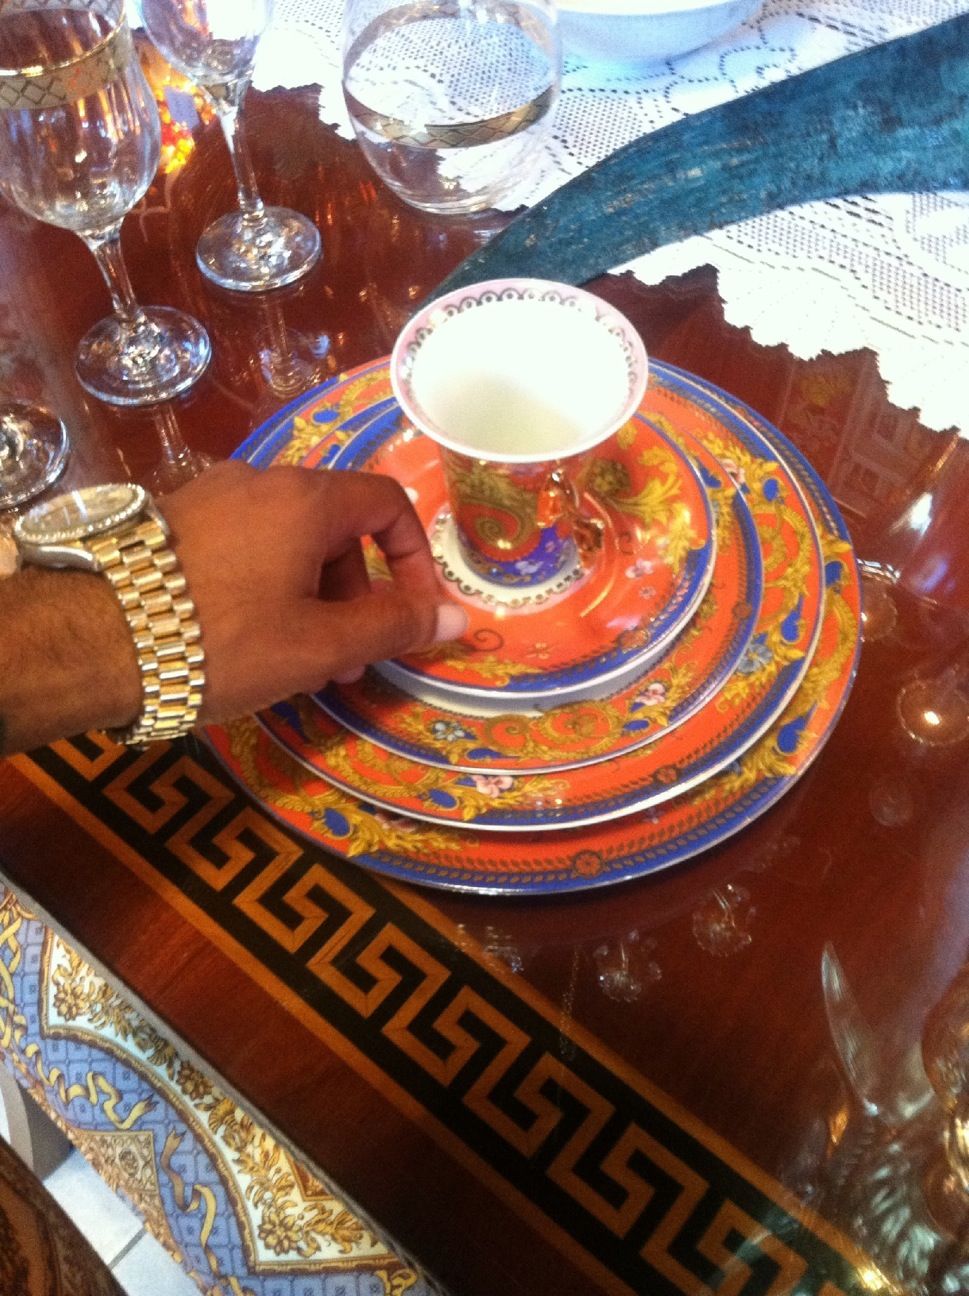 Wat u know bout a versace table and plates?